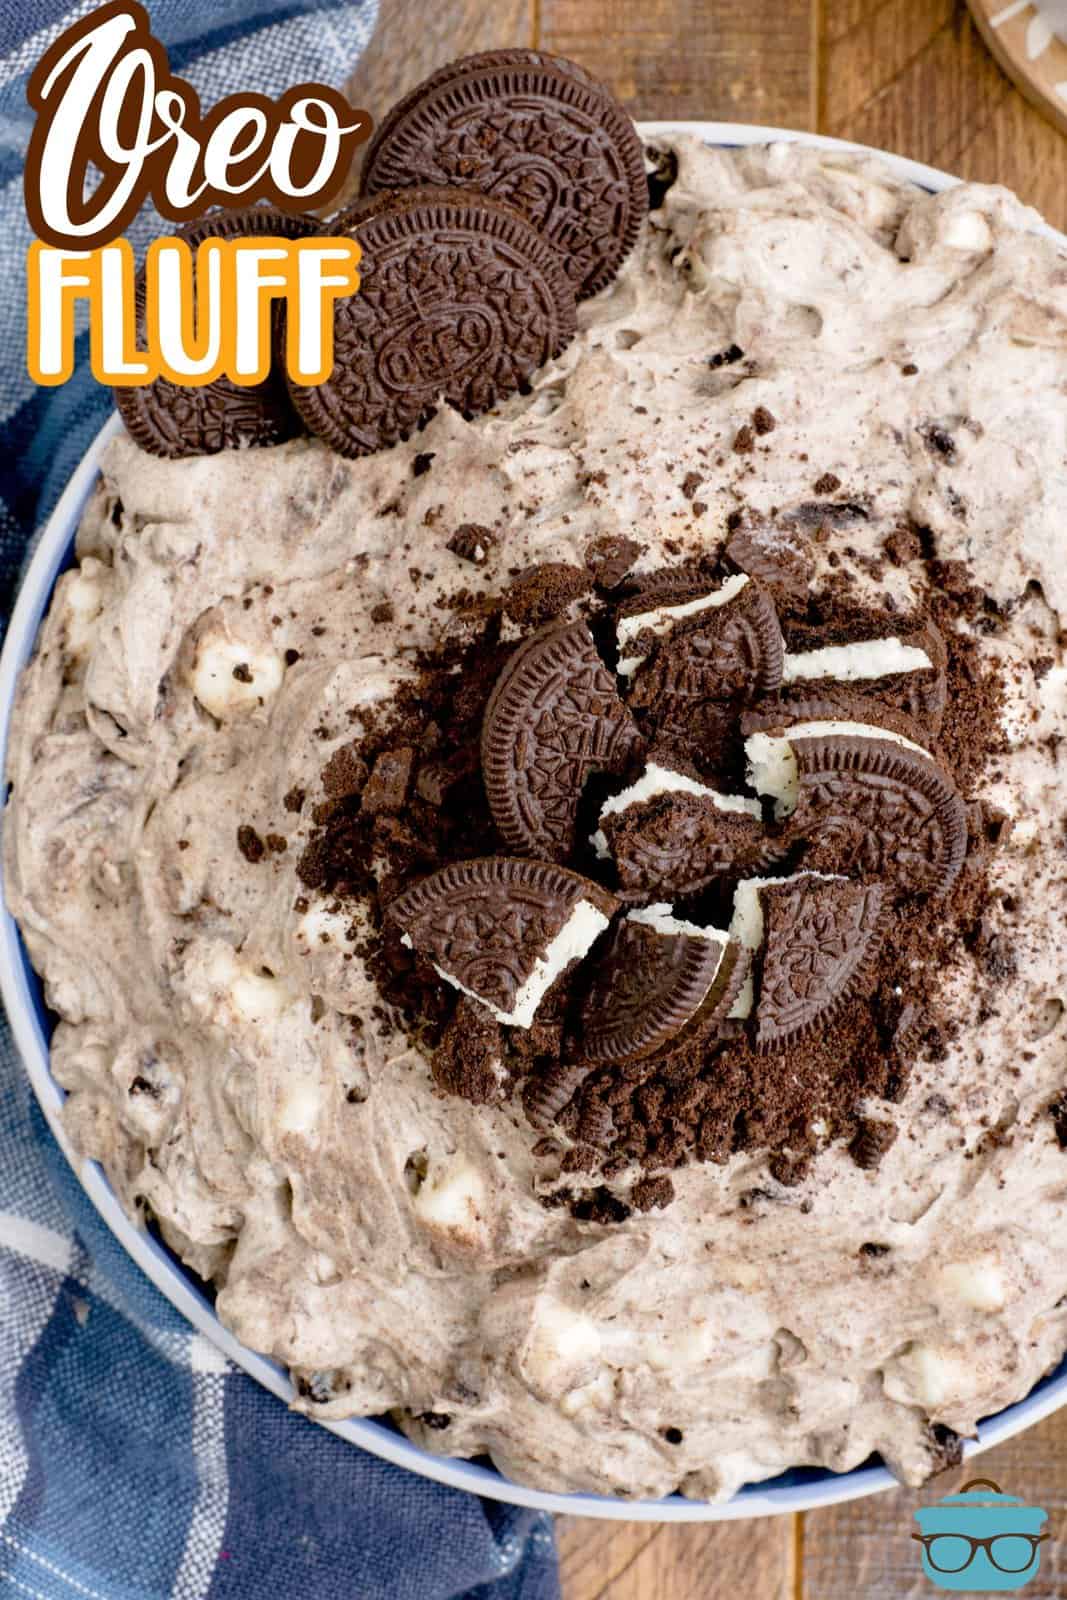 A bowl of Oreo fluff with crushed Oreos on top.